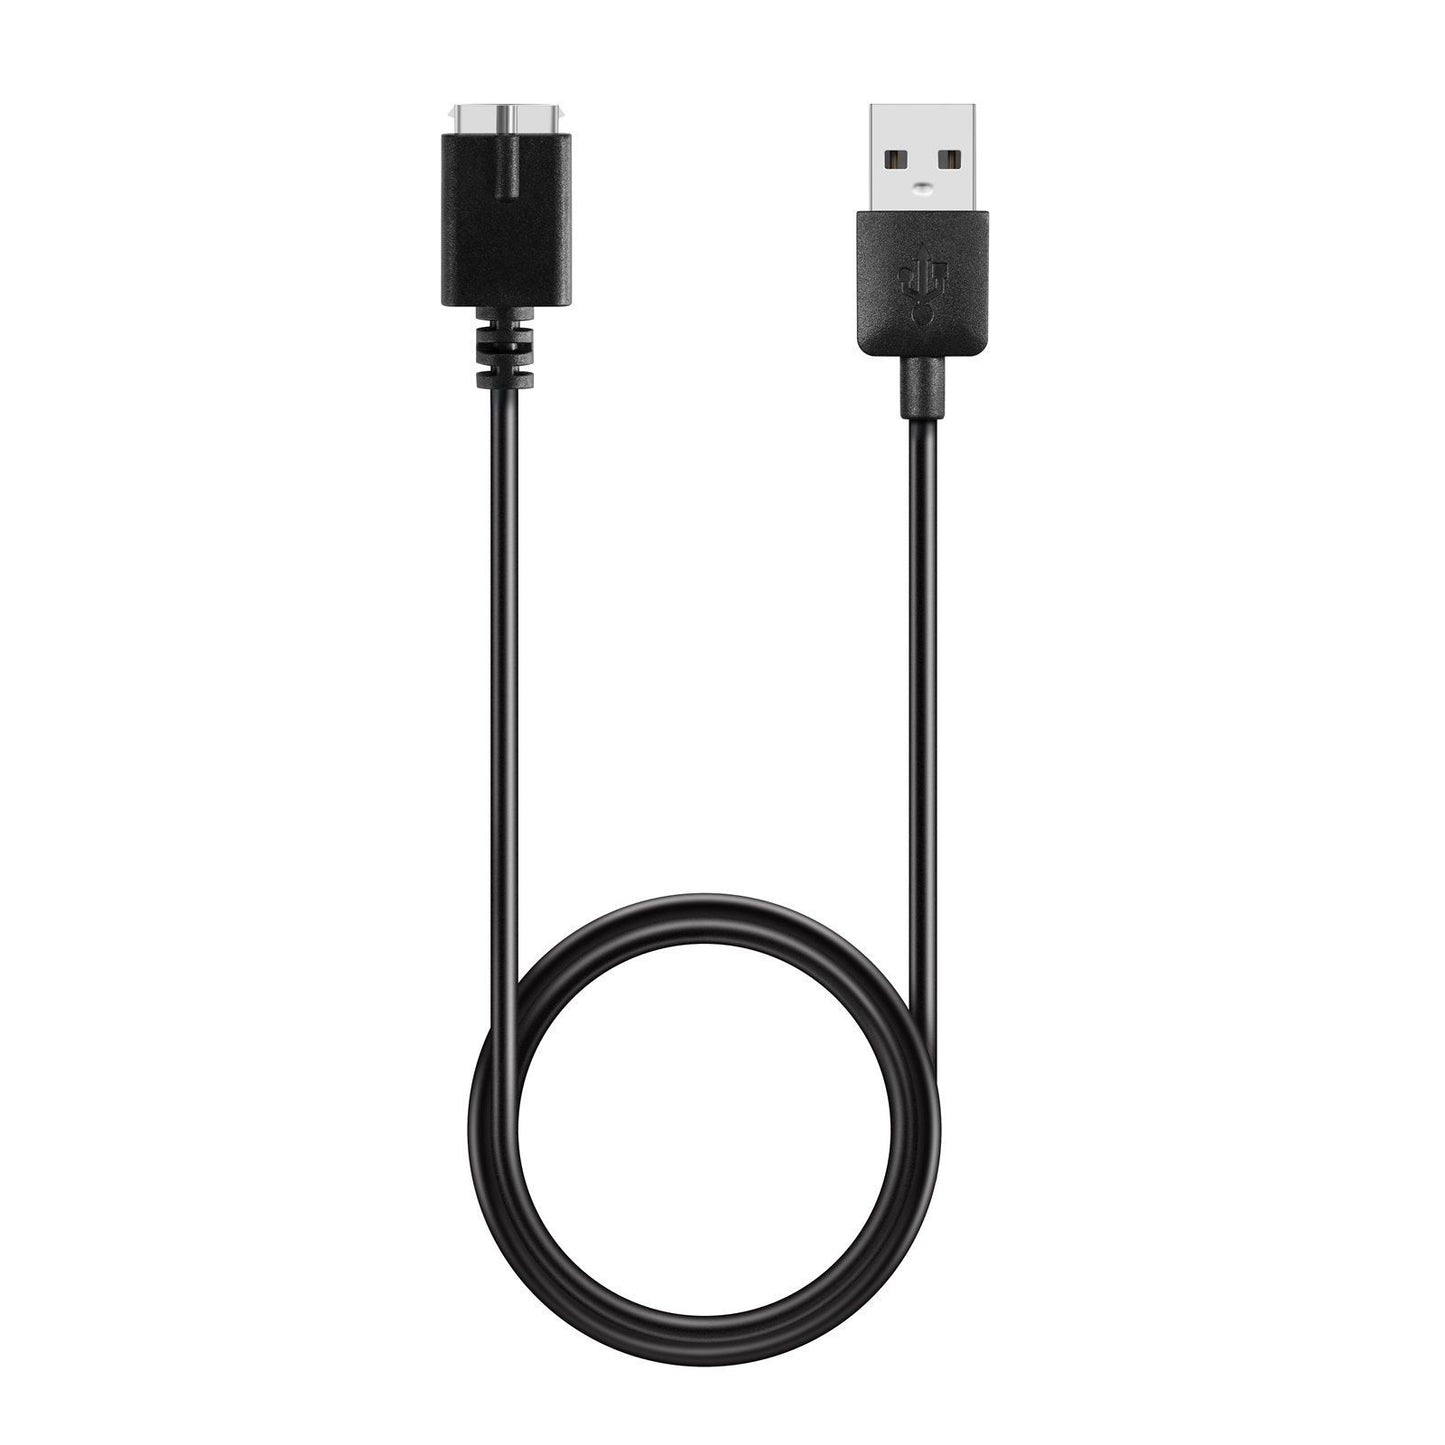 USB Charger for Polar M430